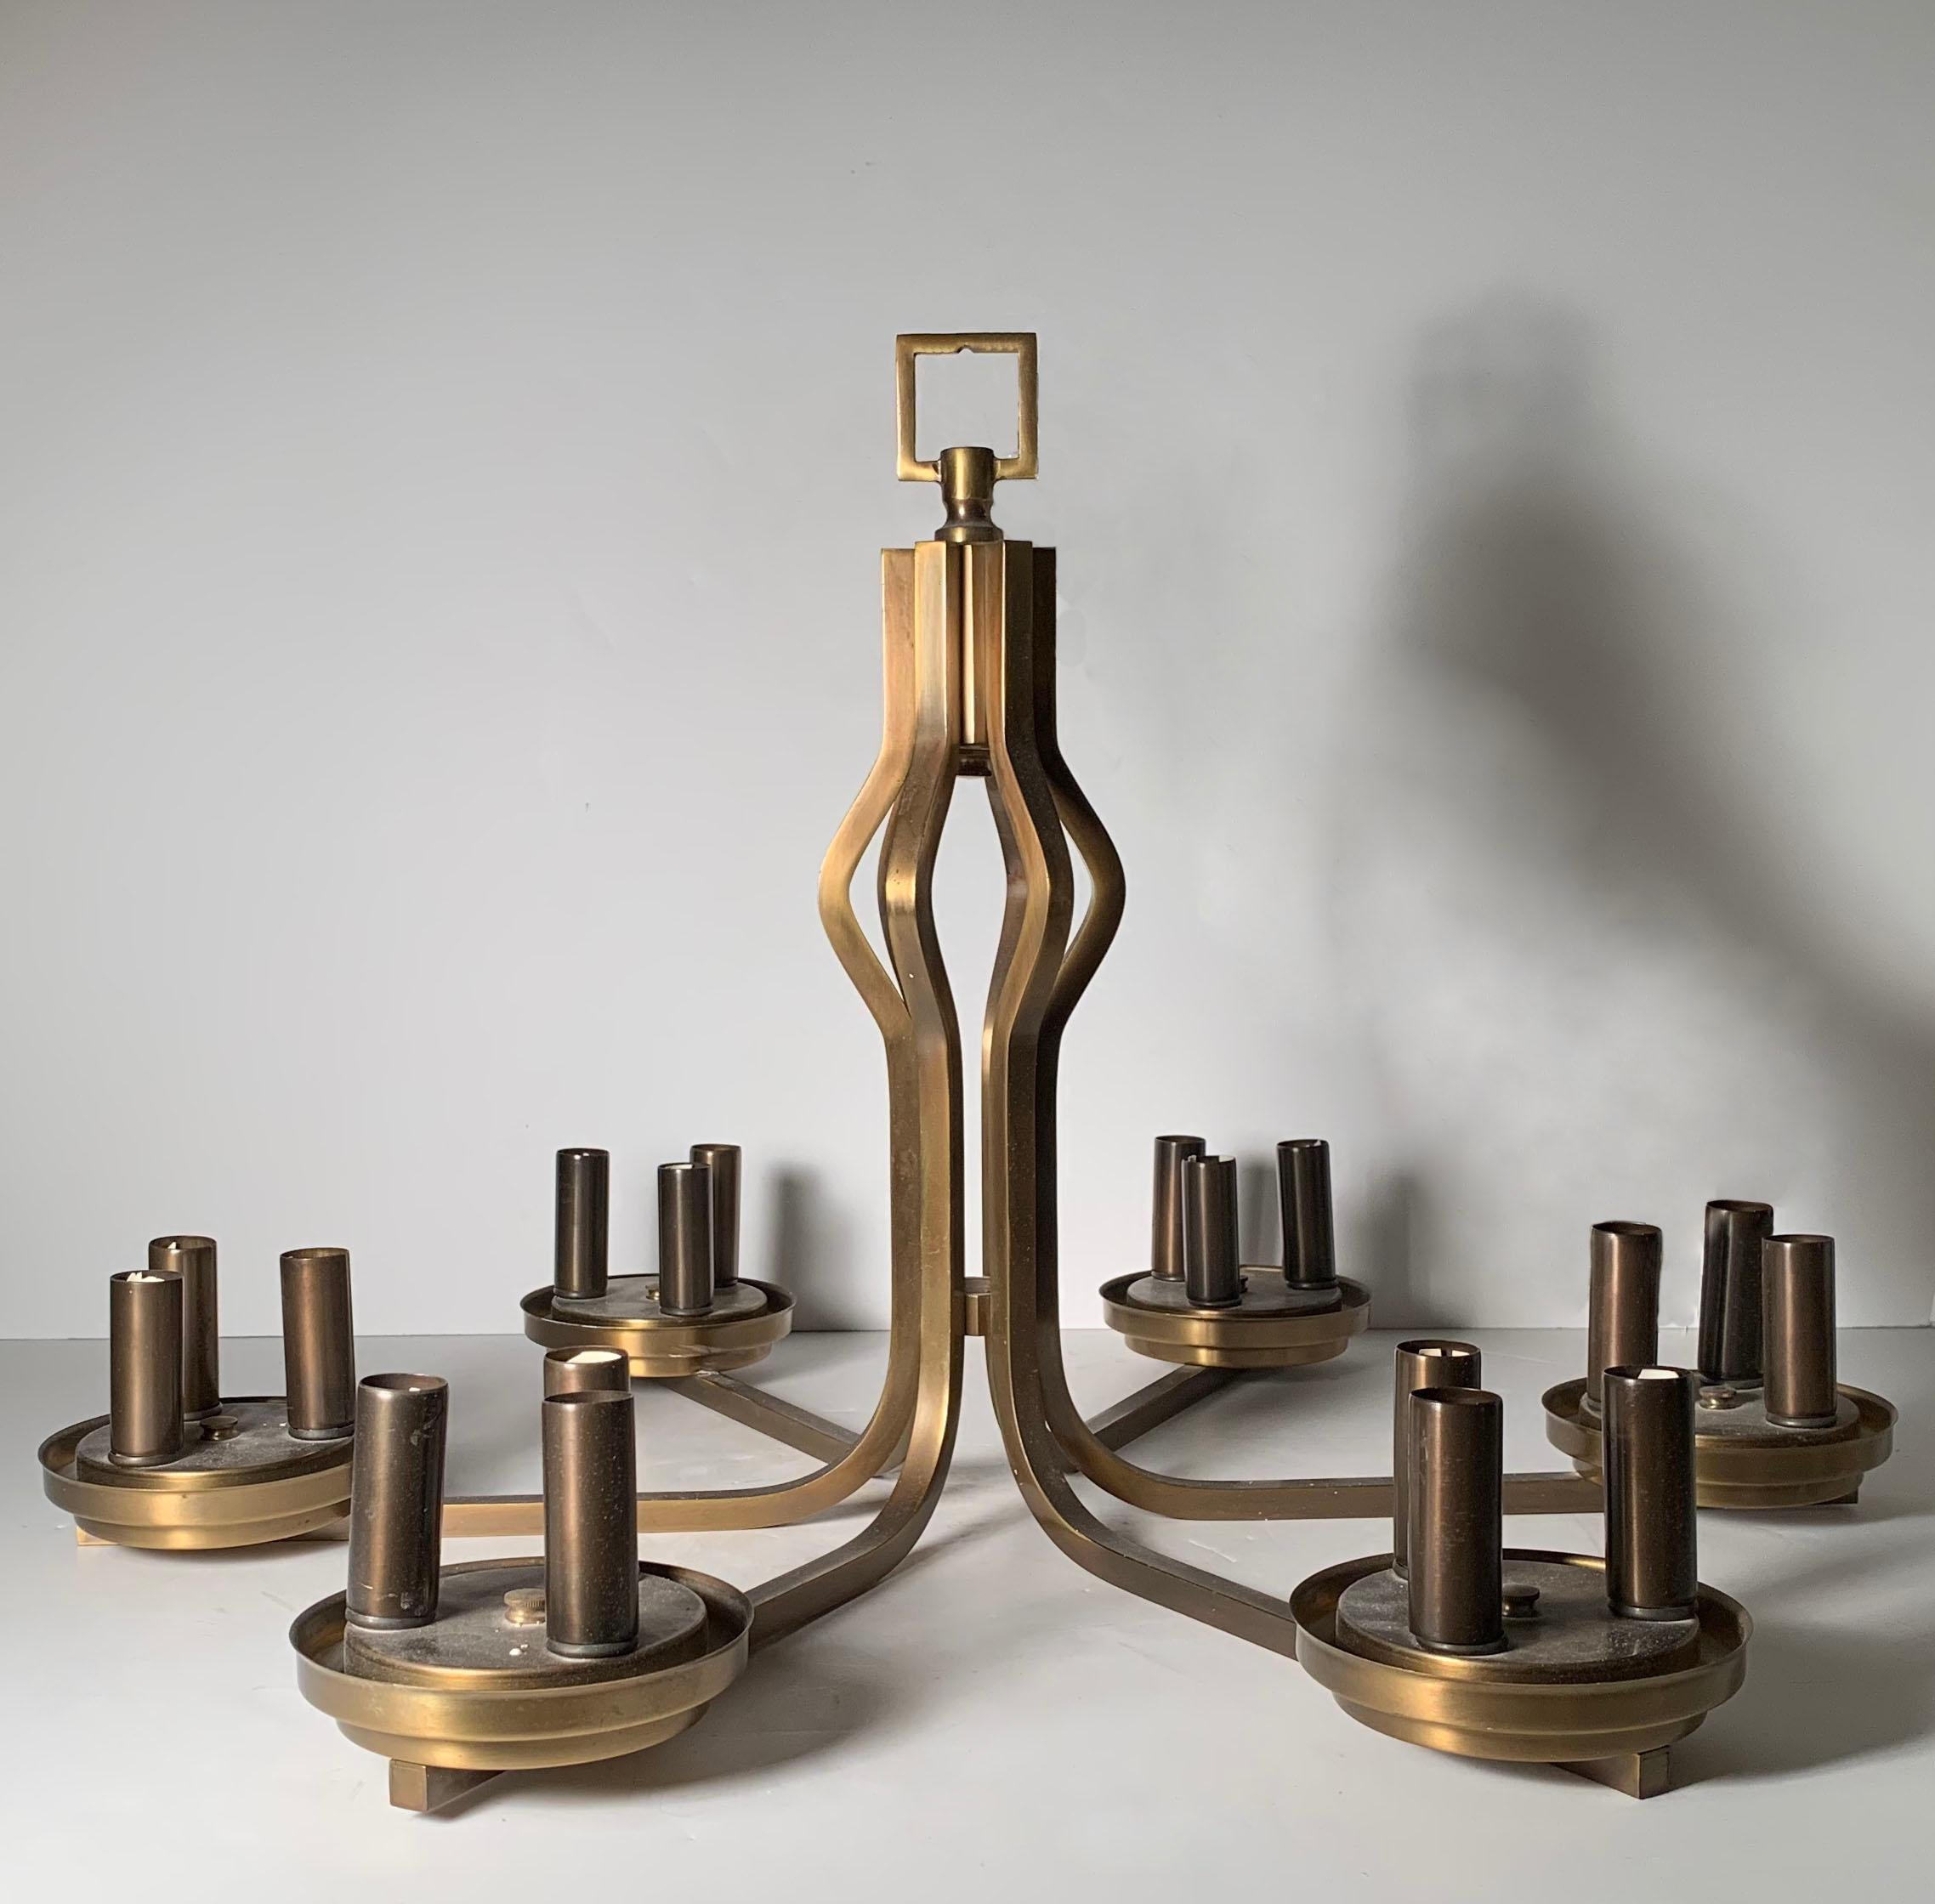 Vintage Mid-Century Modern bronze finish chandelier. Uncertain to designer. Manner of Paul McCobb, Milo Baughman, Walter Von Nessen

Just needs some nice glass cylinder shades. Or could do fabric shades over the bulbs as well.